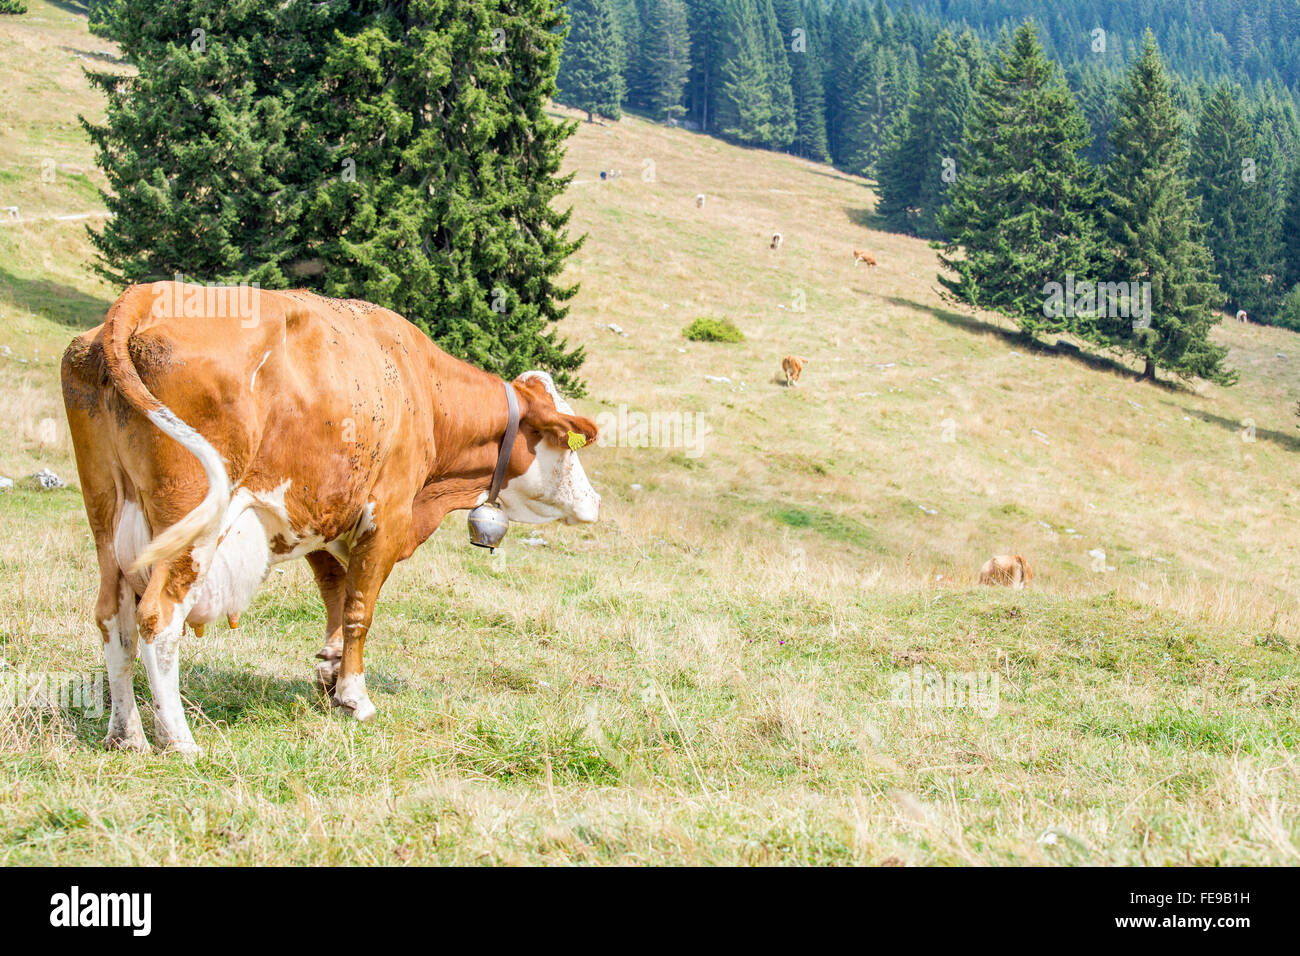 A cow is looking towards the herd grazing on an alpine pasture with coniferous trees on the background Stock Photo